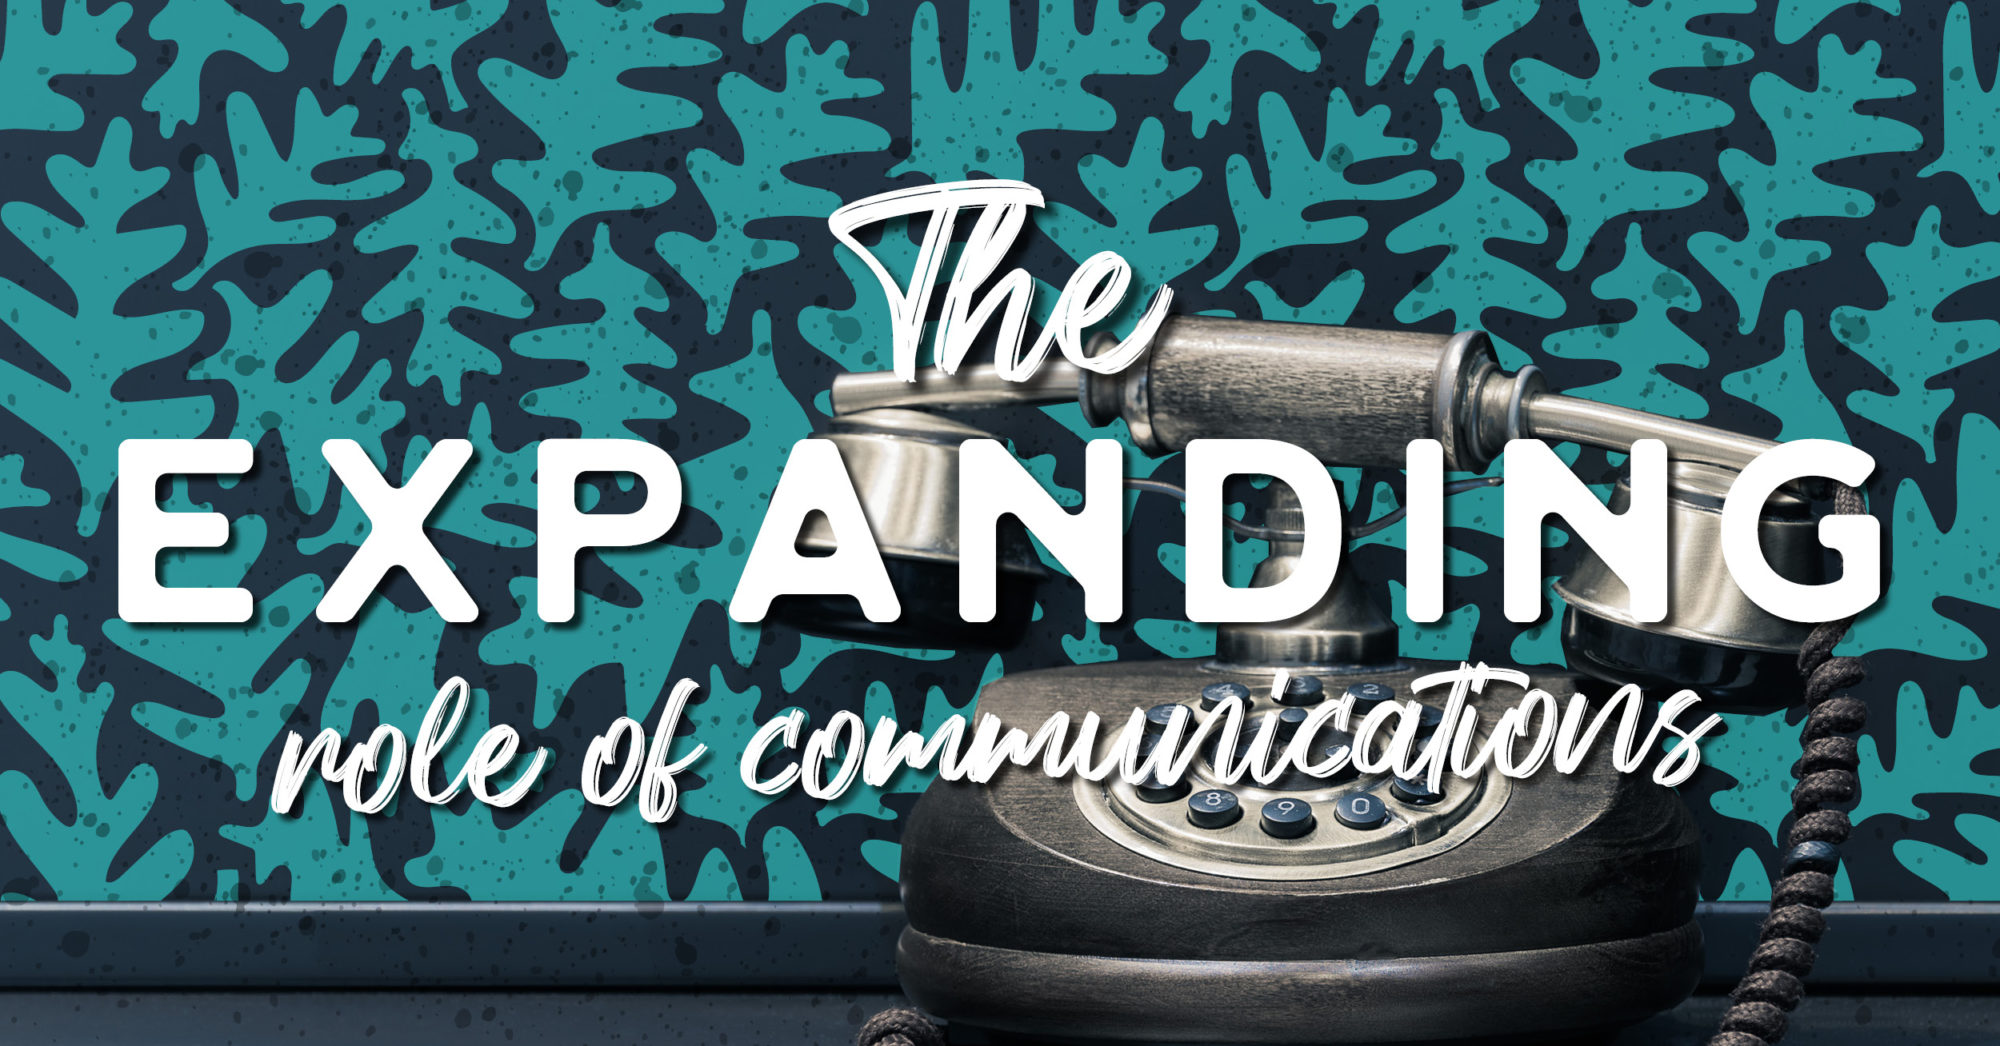 "The Expanding Role of Communications" in white text over top of a vintage metal telephone and a navy and teal leaf pattern.